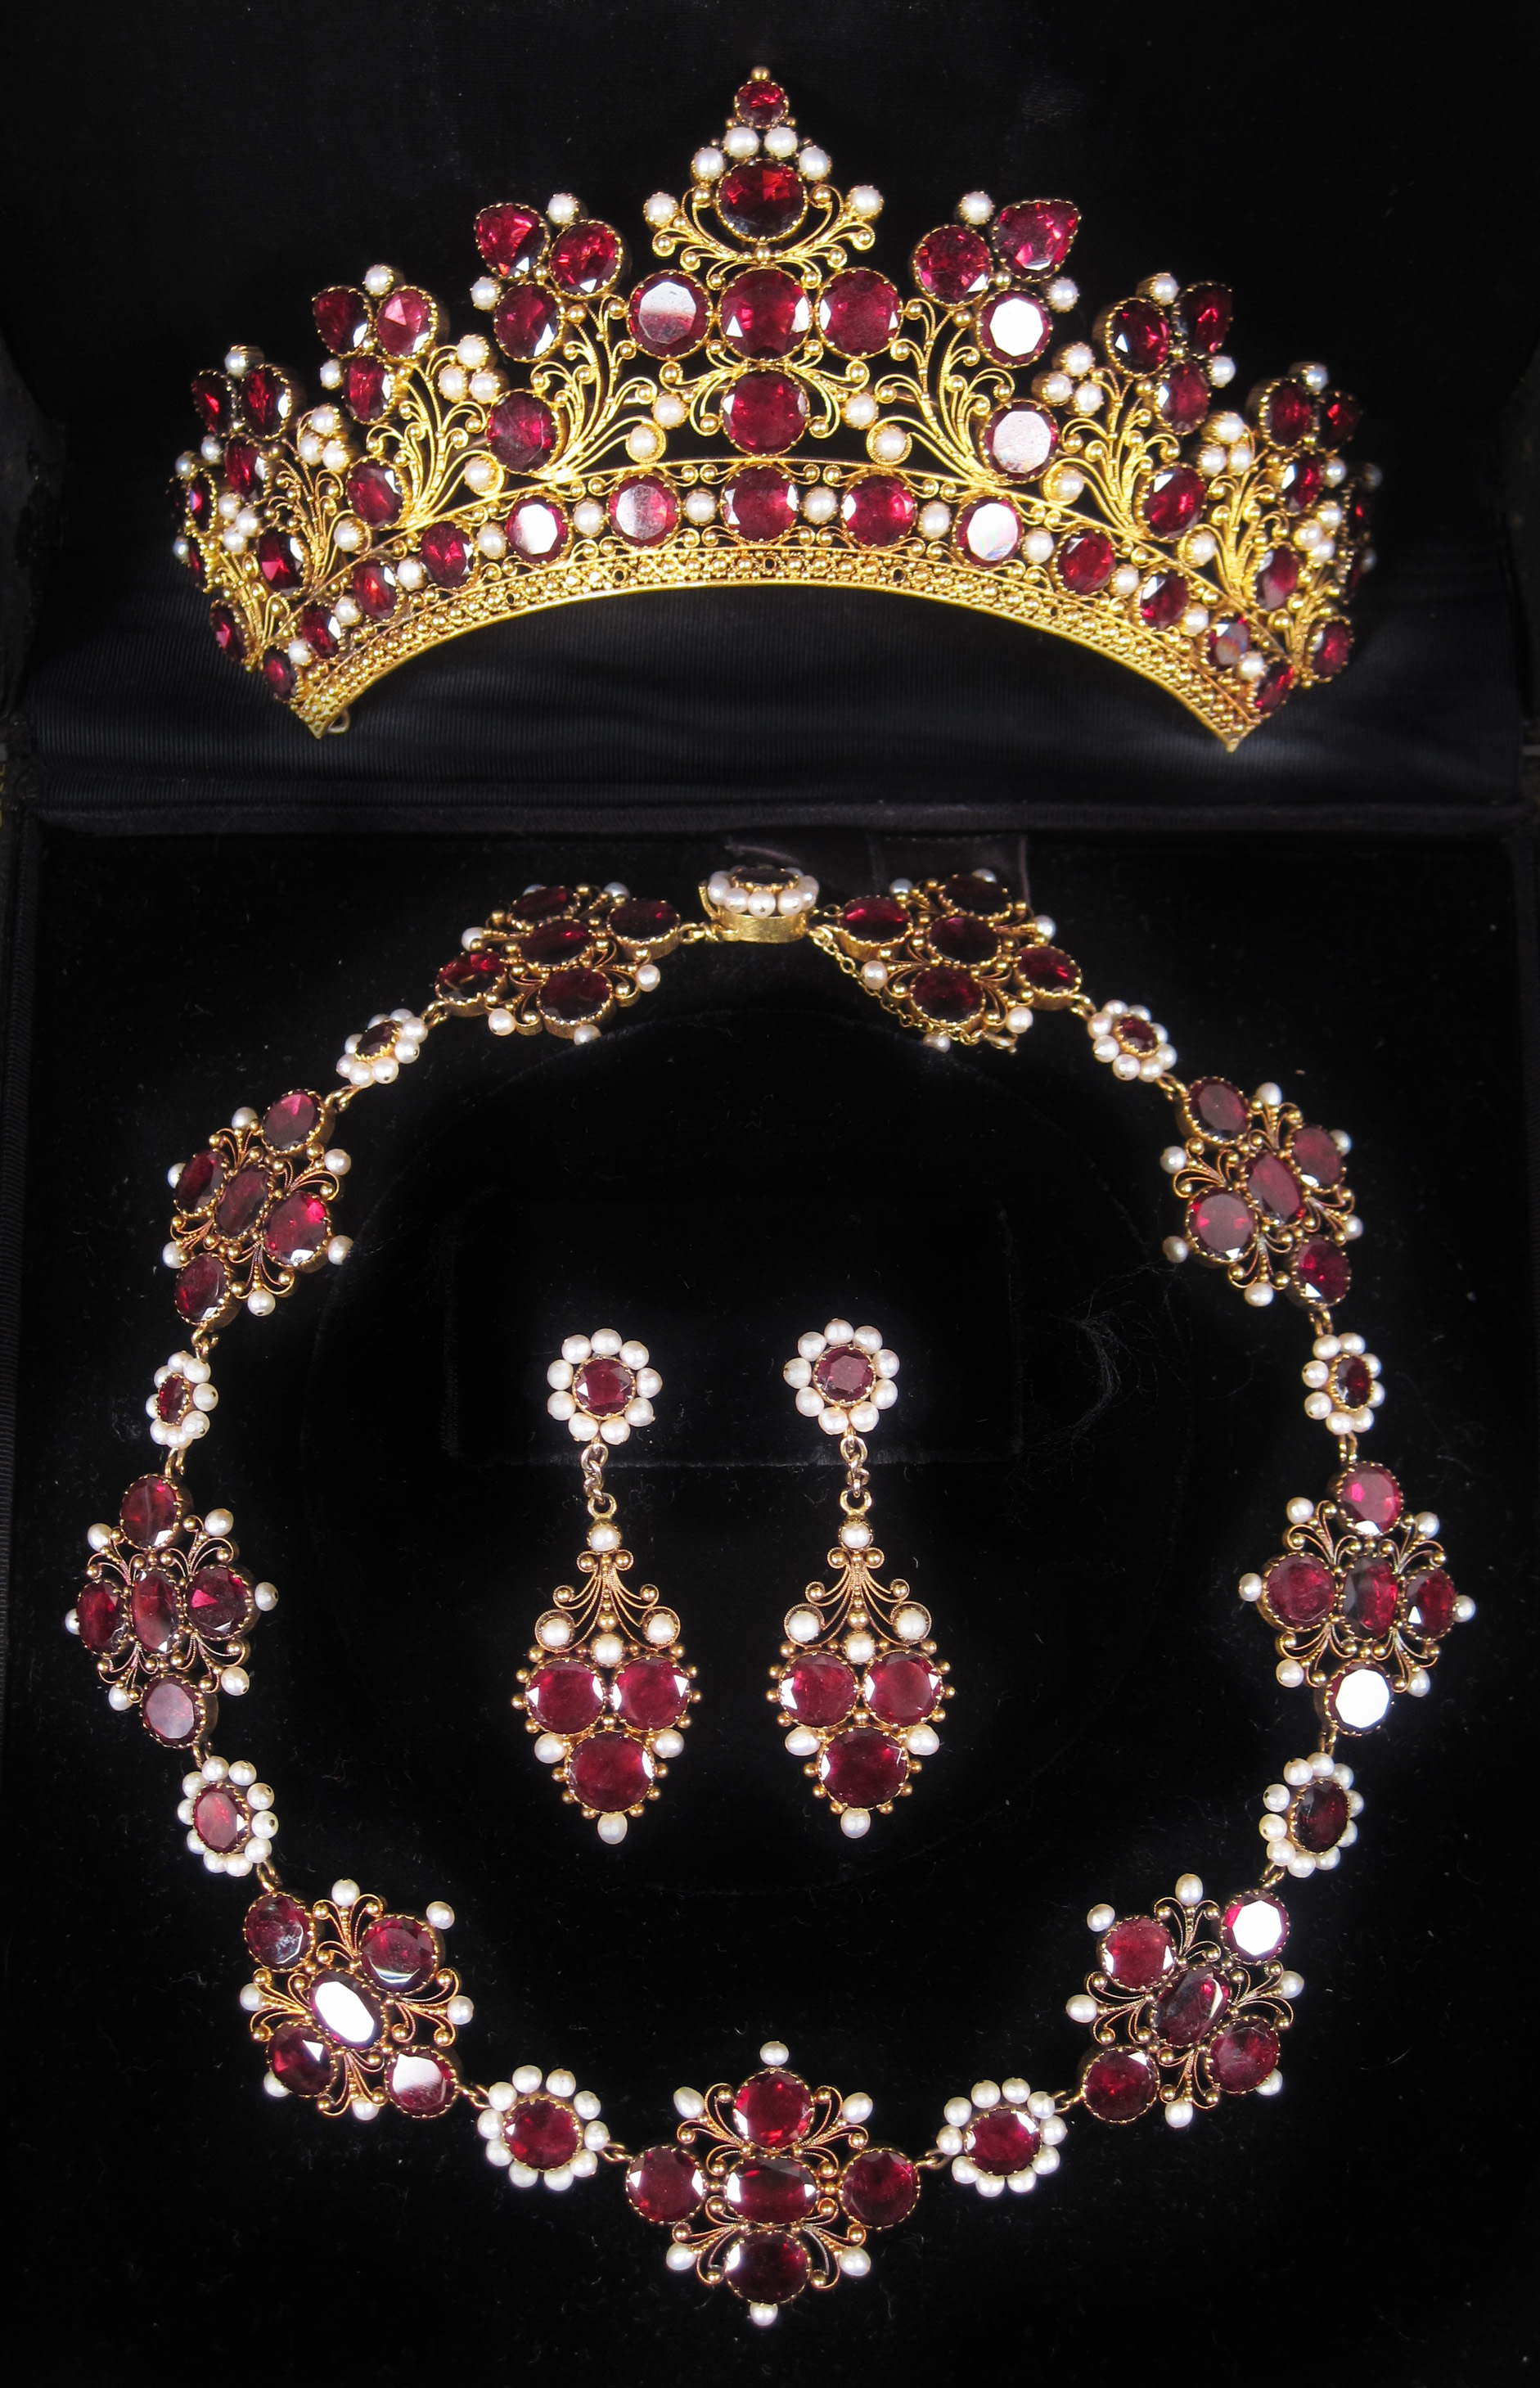 Antique Gold Ruby and Pearl Tiara Necklace and Earring Suite